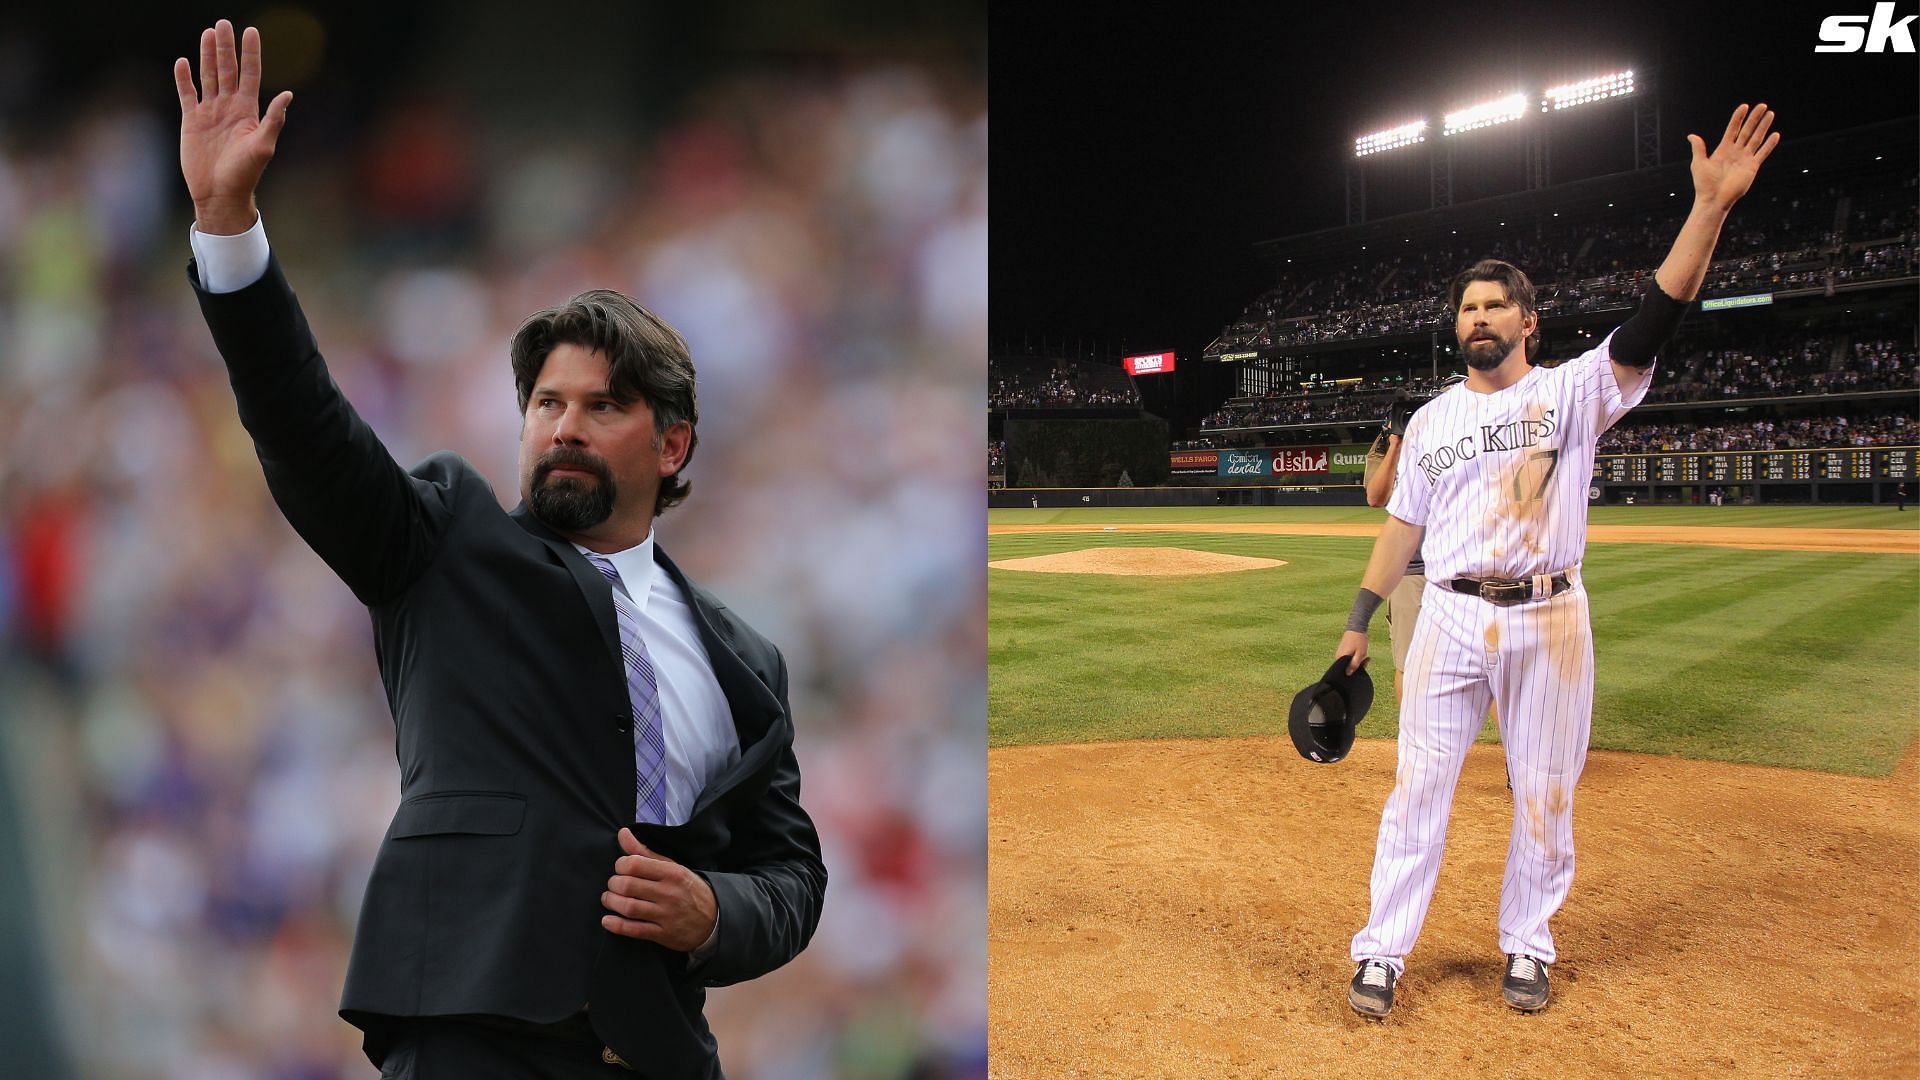 Former first baseman Todd Helton of the Colorado Rockies waves to the crowd during a ceremony to retire his number before a game against the Cincinnati Reds at Coors Field in 2014